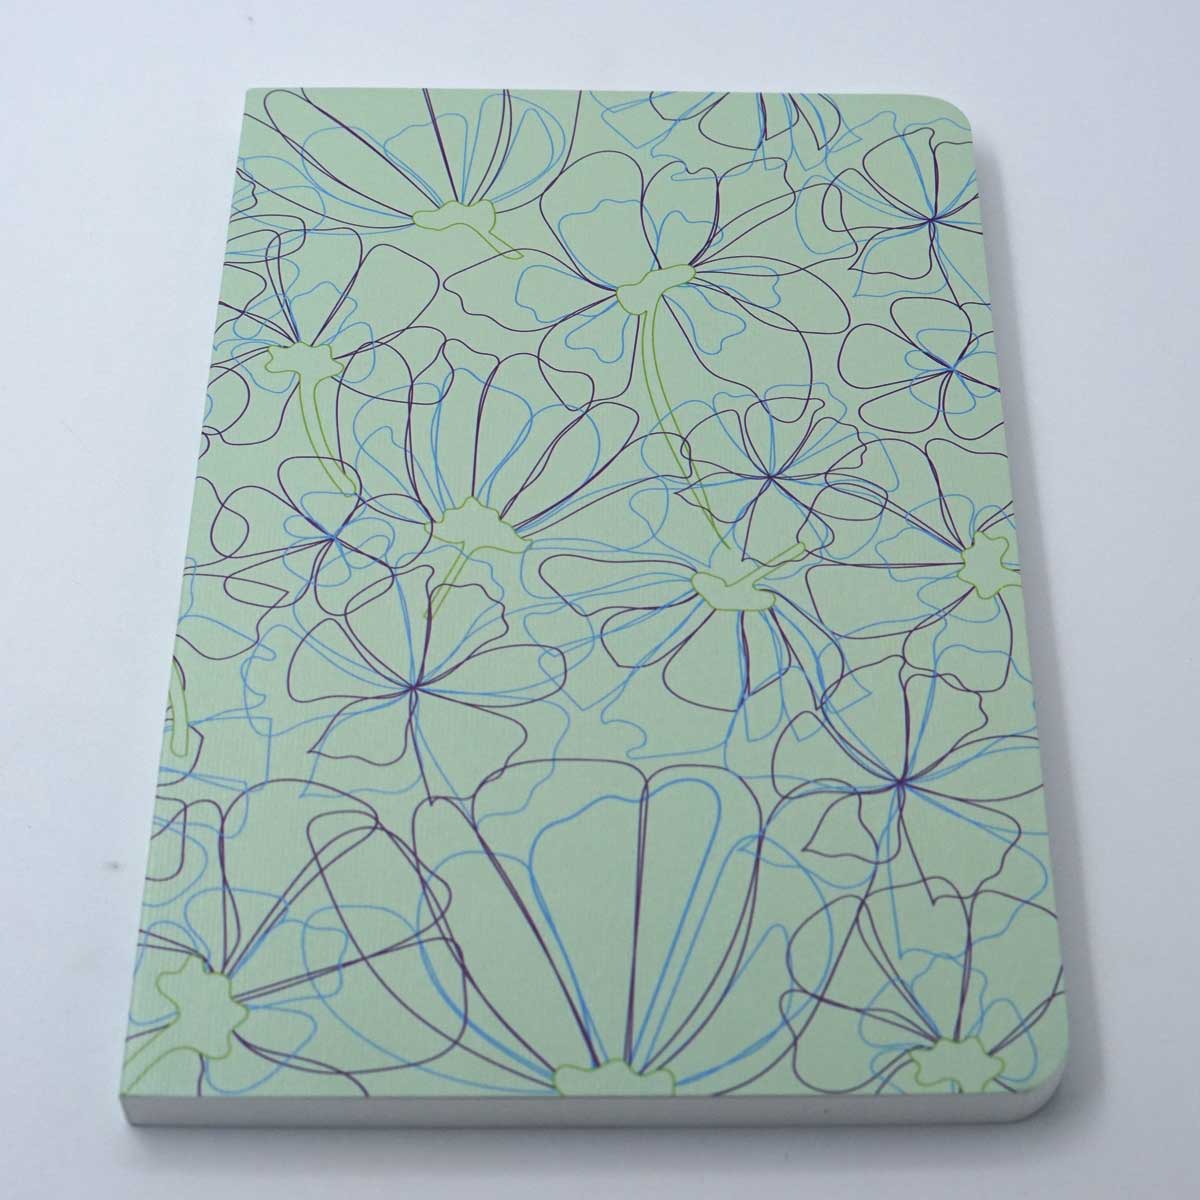 Factor A5 160 Pages Green Pencil  Flowers  Design Soft Bound 90Gms Ruled Note Book SKU 50271